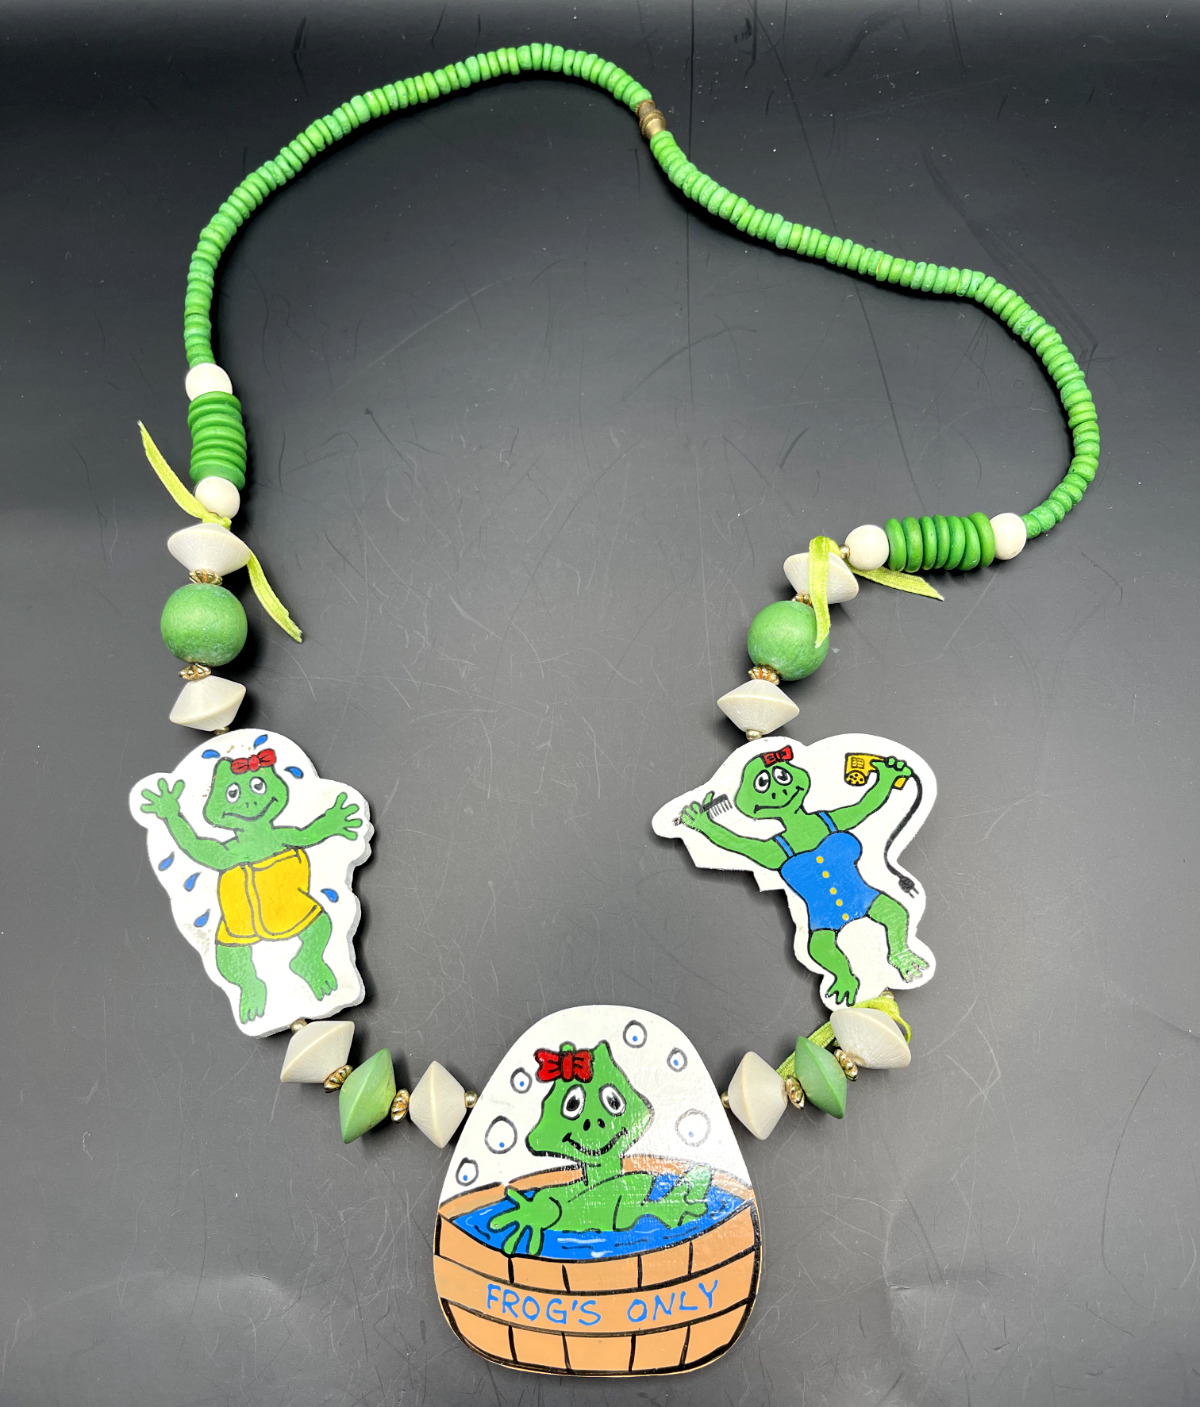 Frogs Only Wooden Necklace Vintage Wooden Cartoon Frog Green